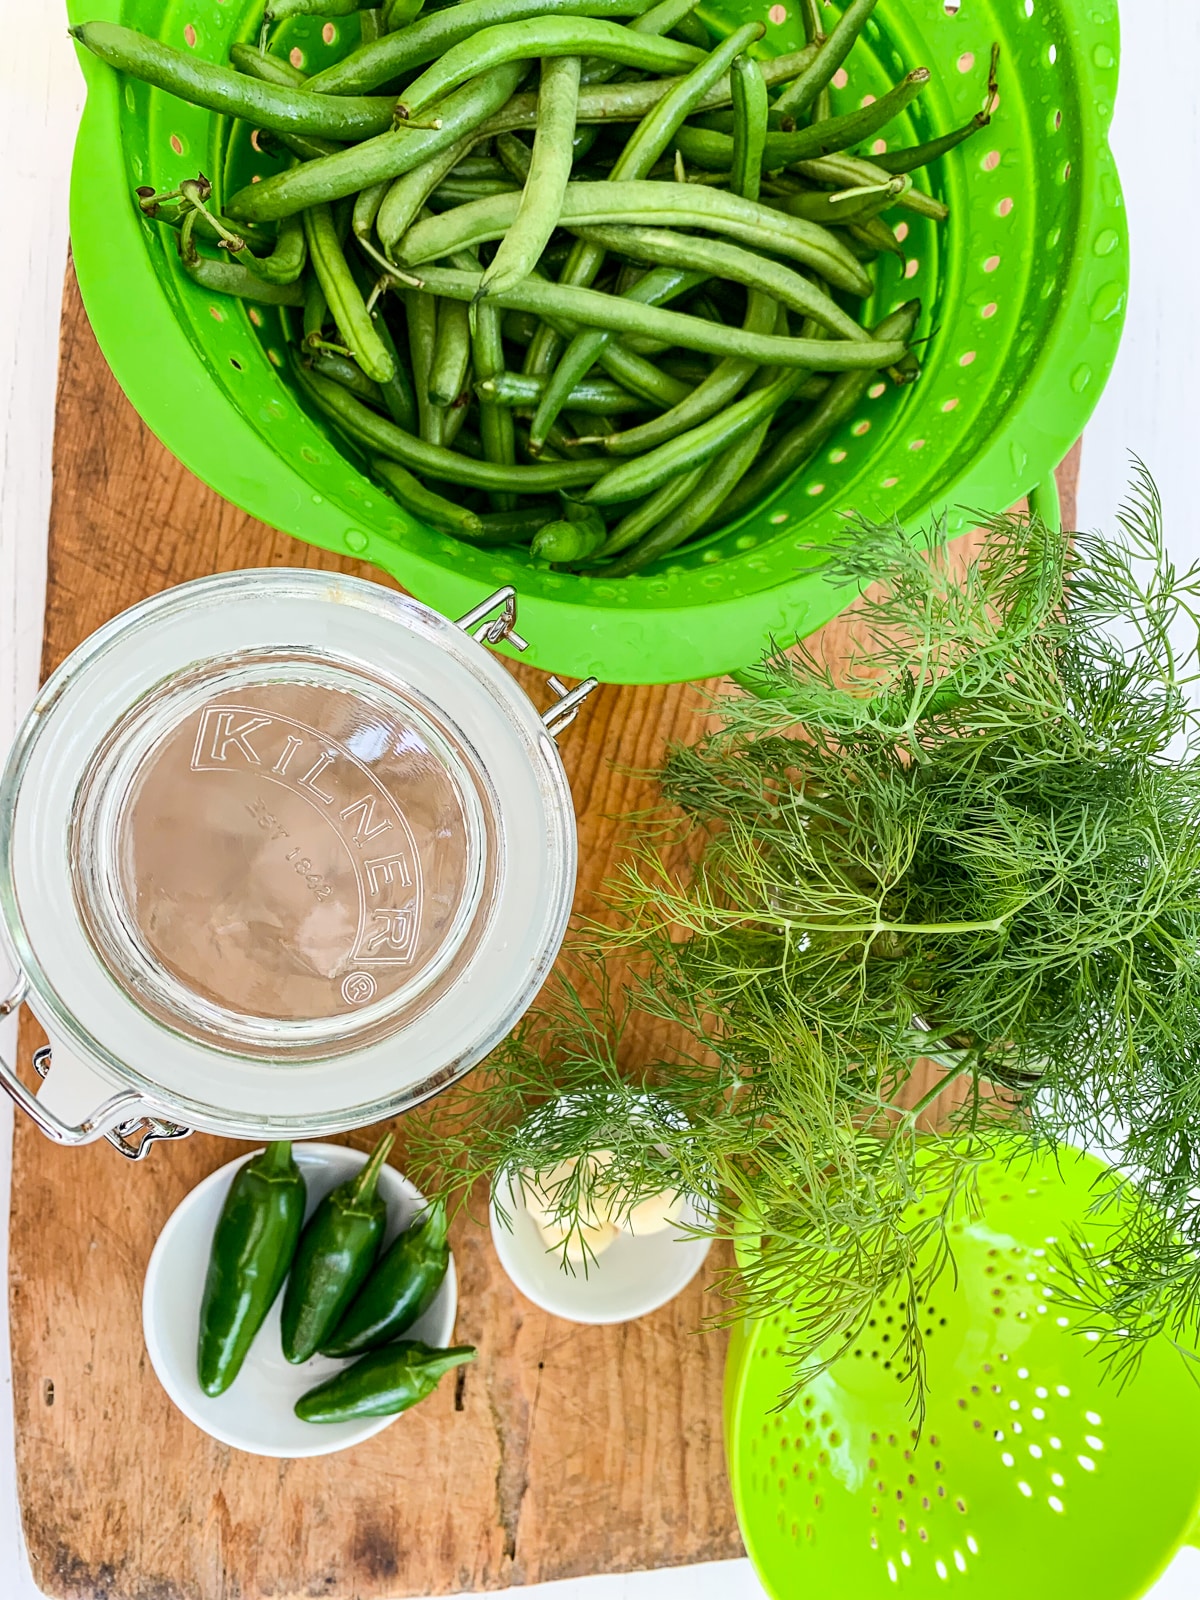 A cutting board with a green colander filled with green beans and ingredients. 